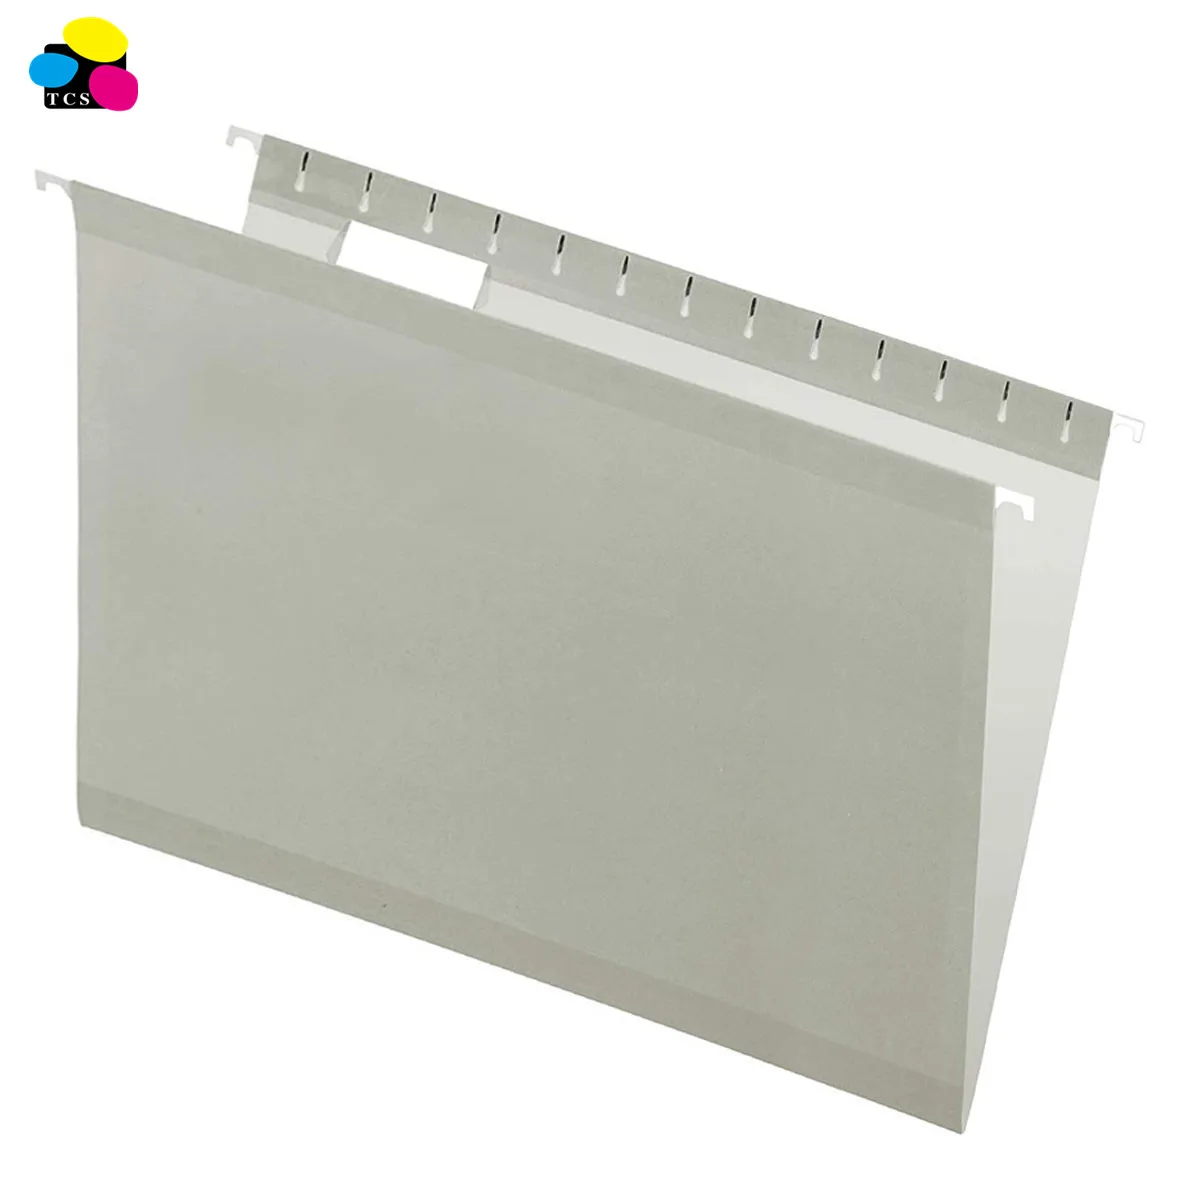 
office supply 1/5 Cut 8 1/2in. x 14in Legal Size2 Tone Gray Hanging File Folders  (625310122)